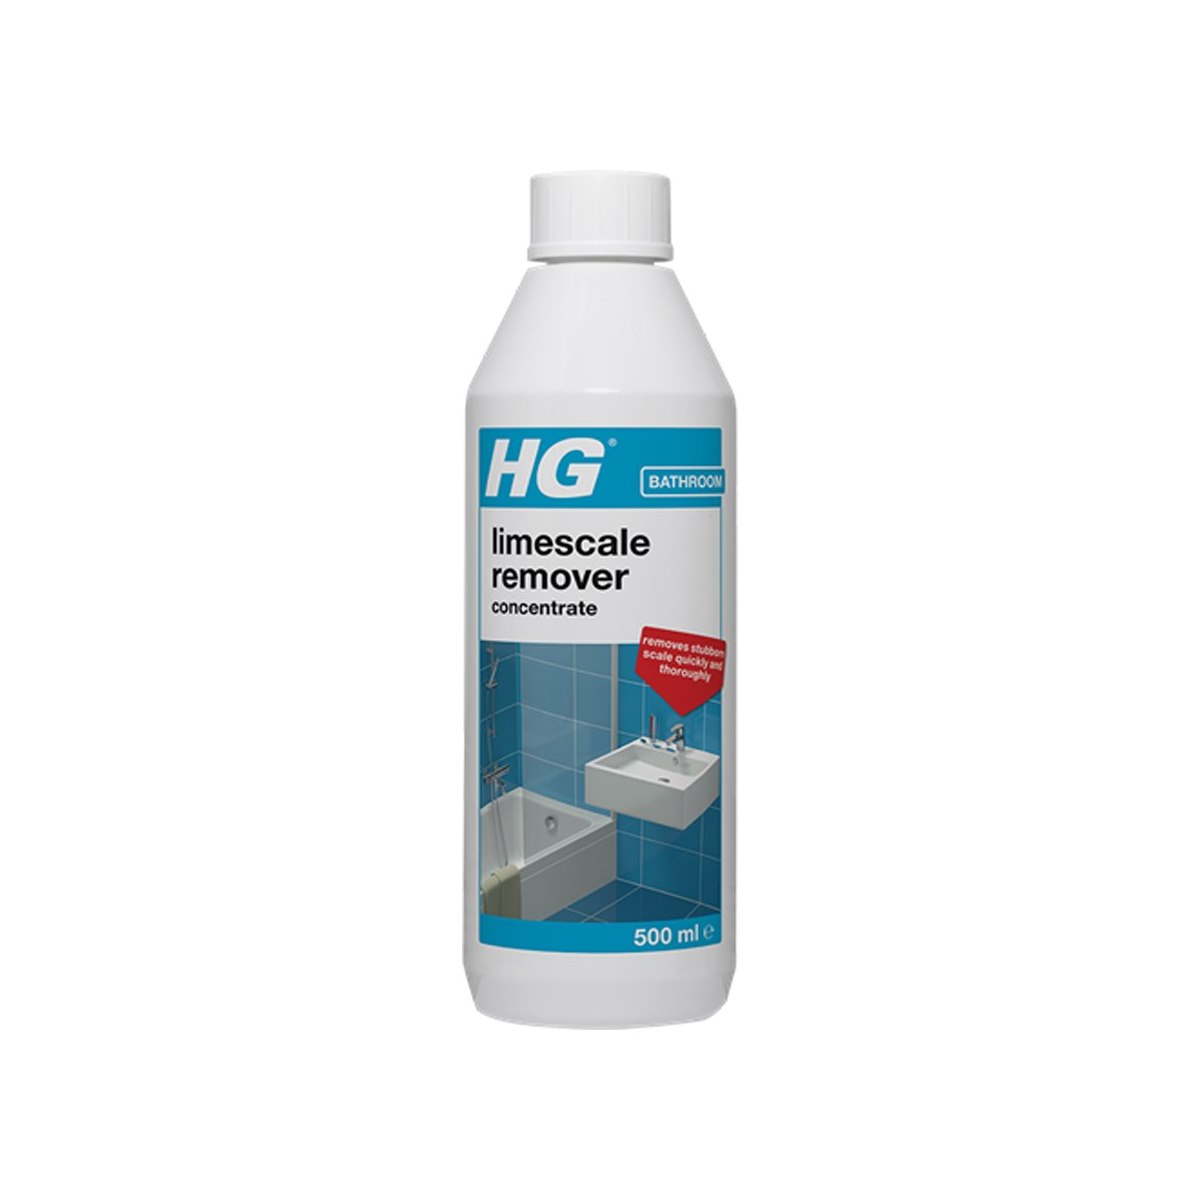 HG Limescale Remover Concentrate 500ml